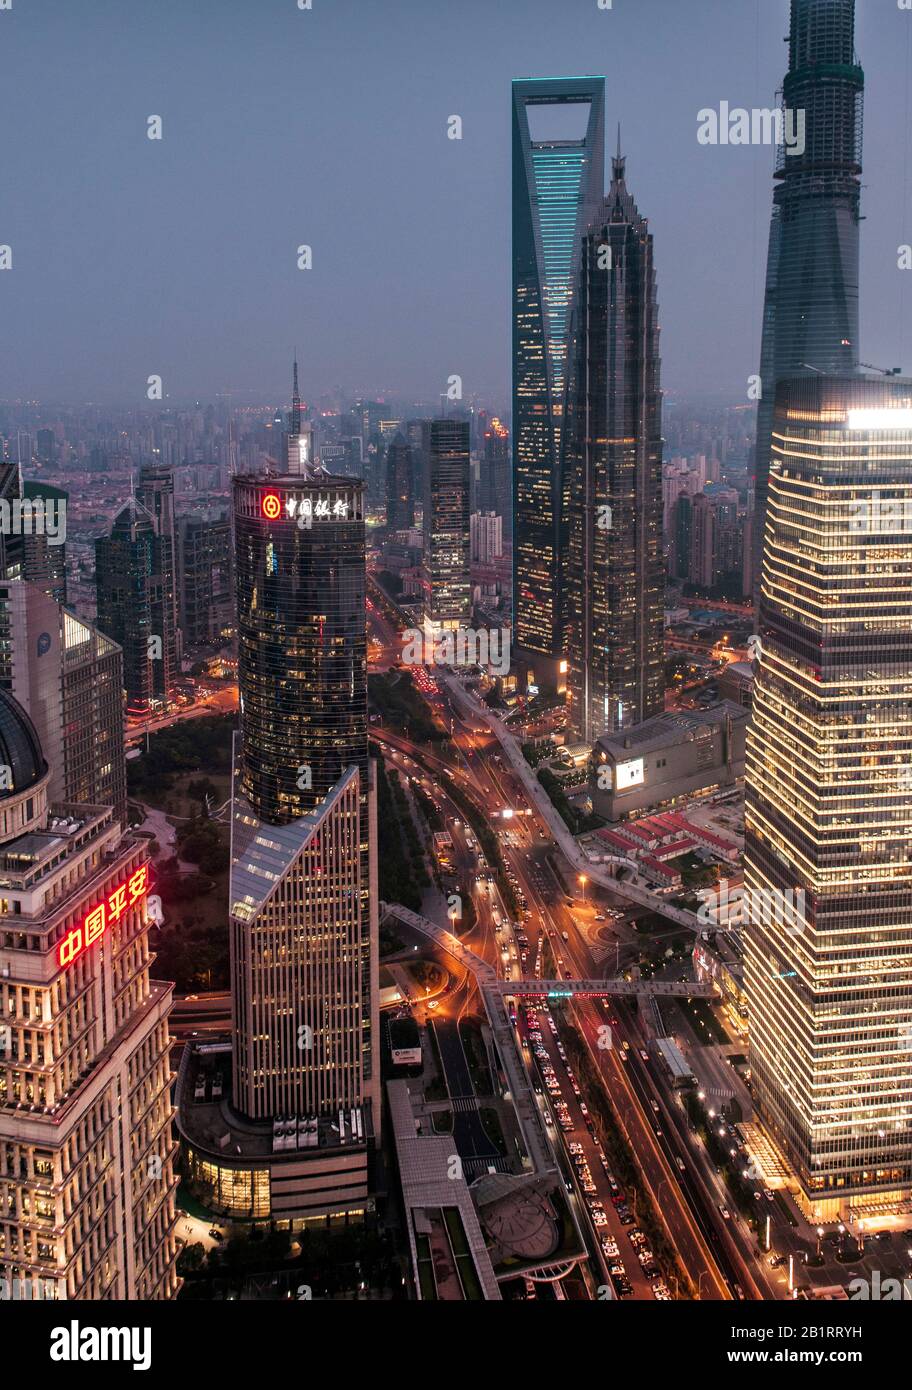 Cityscape, view of IFC, SWFC, Jin Mao Tower at night, Lujiazui, Pudong, Shanghai, China Stock Photo